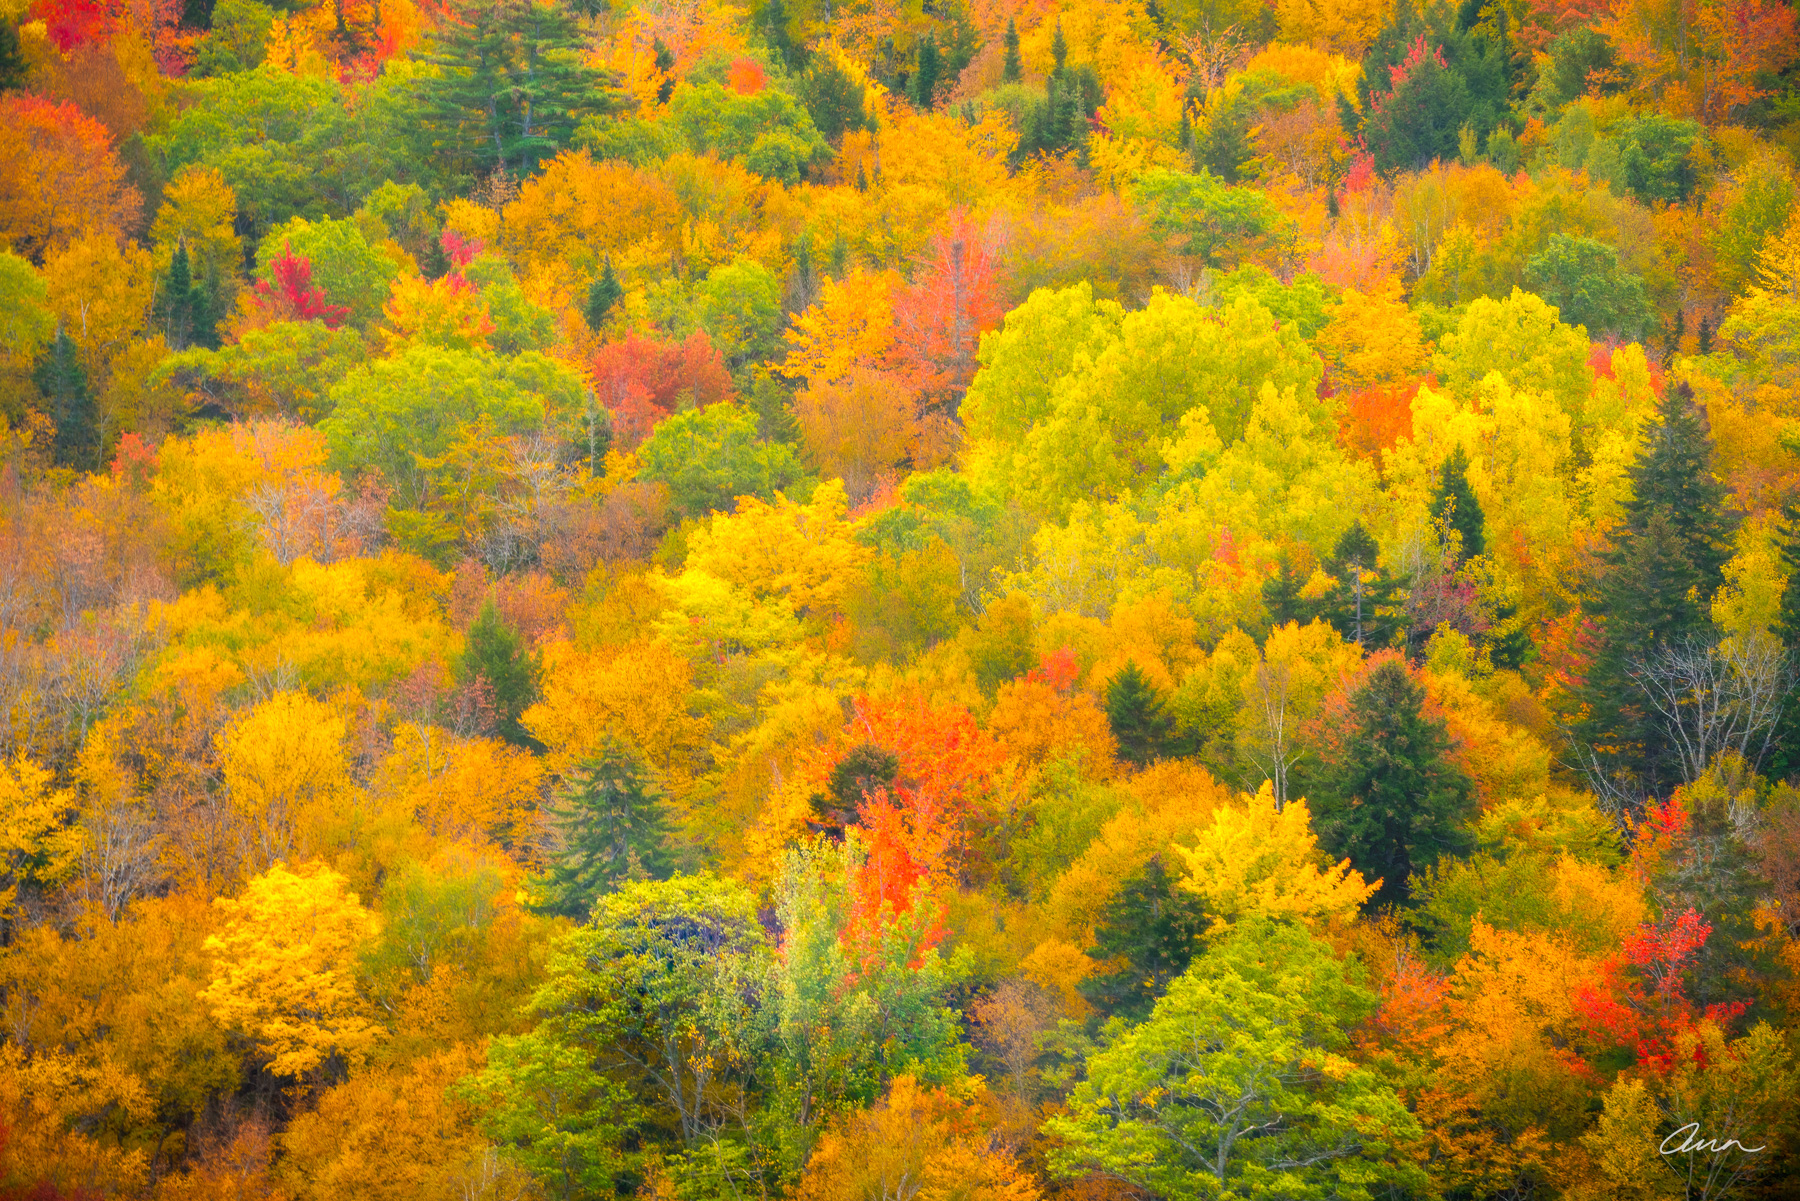 Close-up of fall forest colors in Acadia National Park.